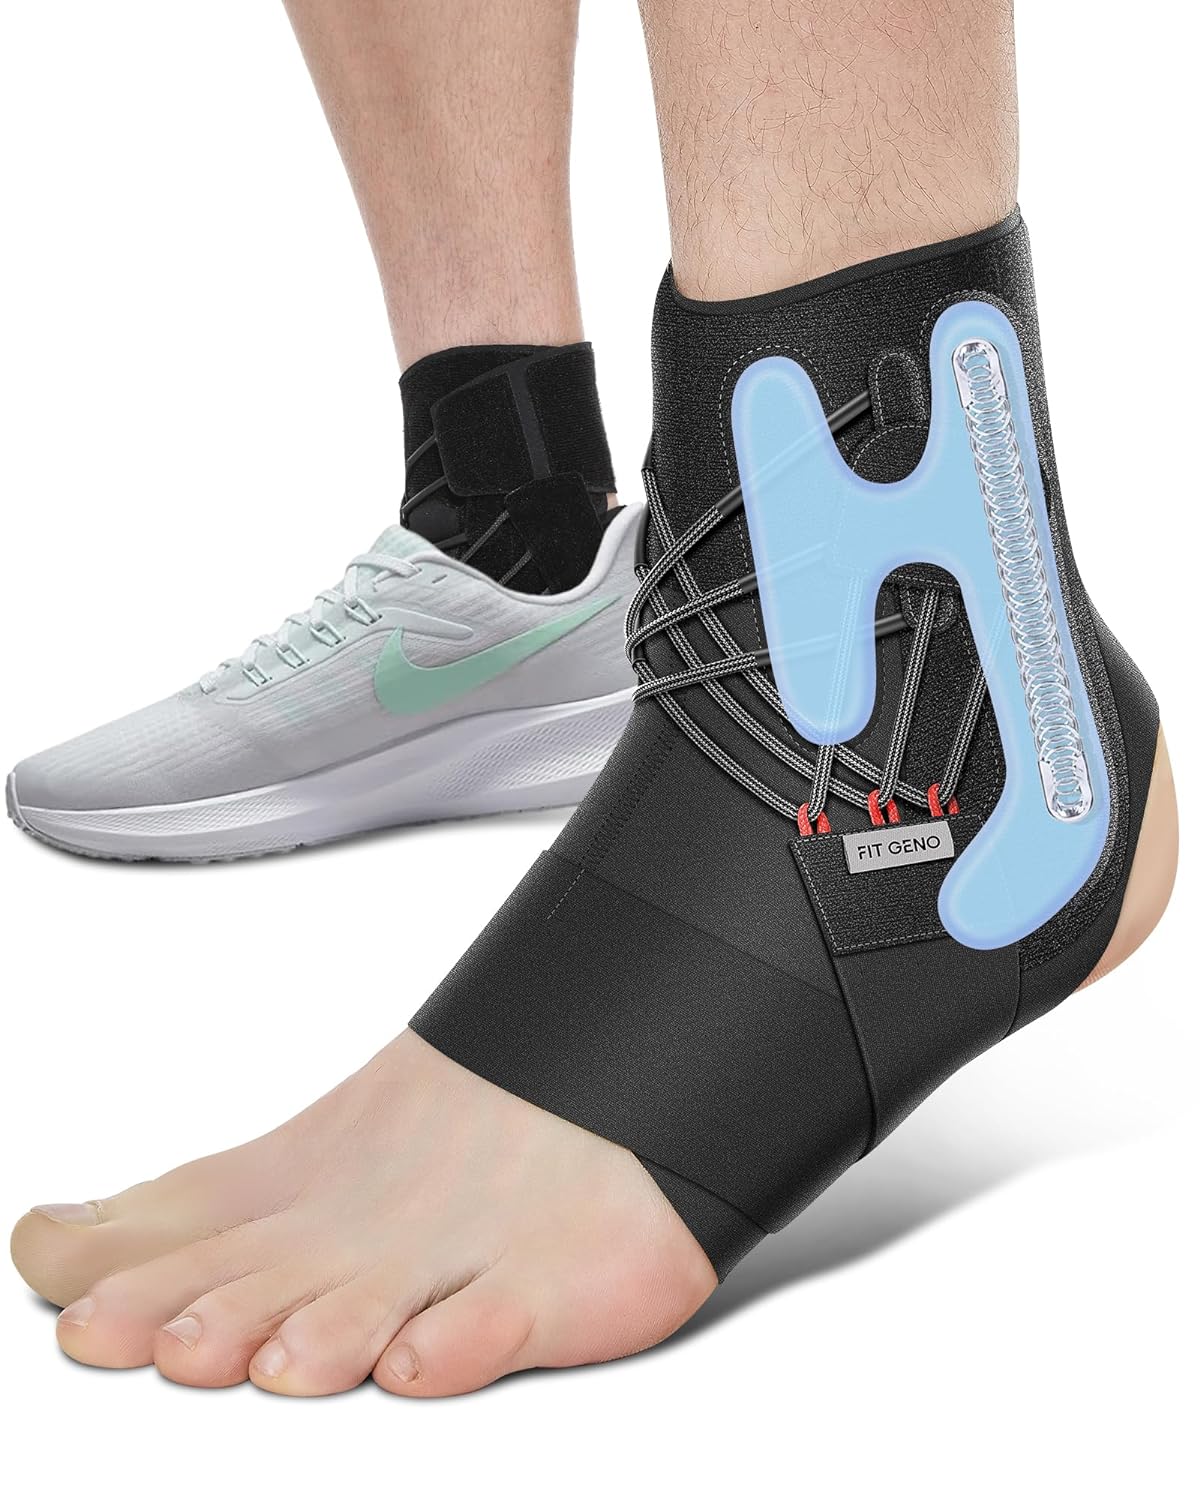 Fit Geno Sprained Ankle Brace Review